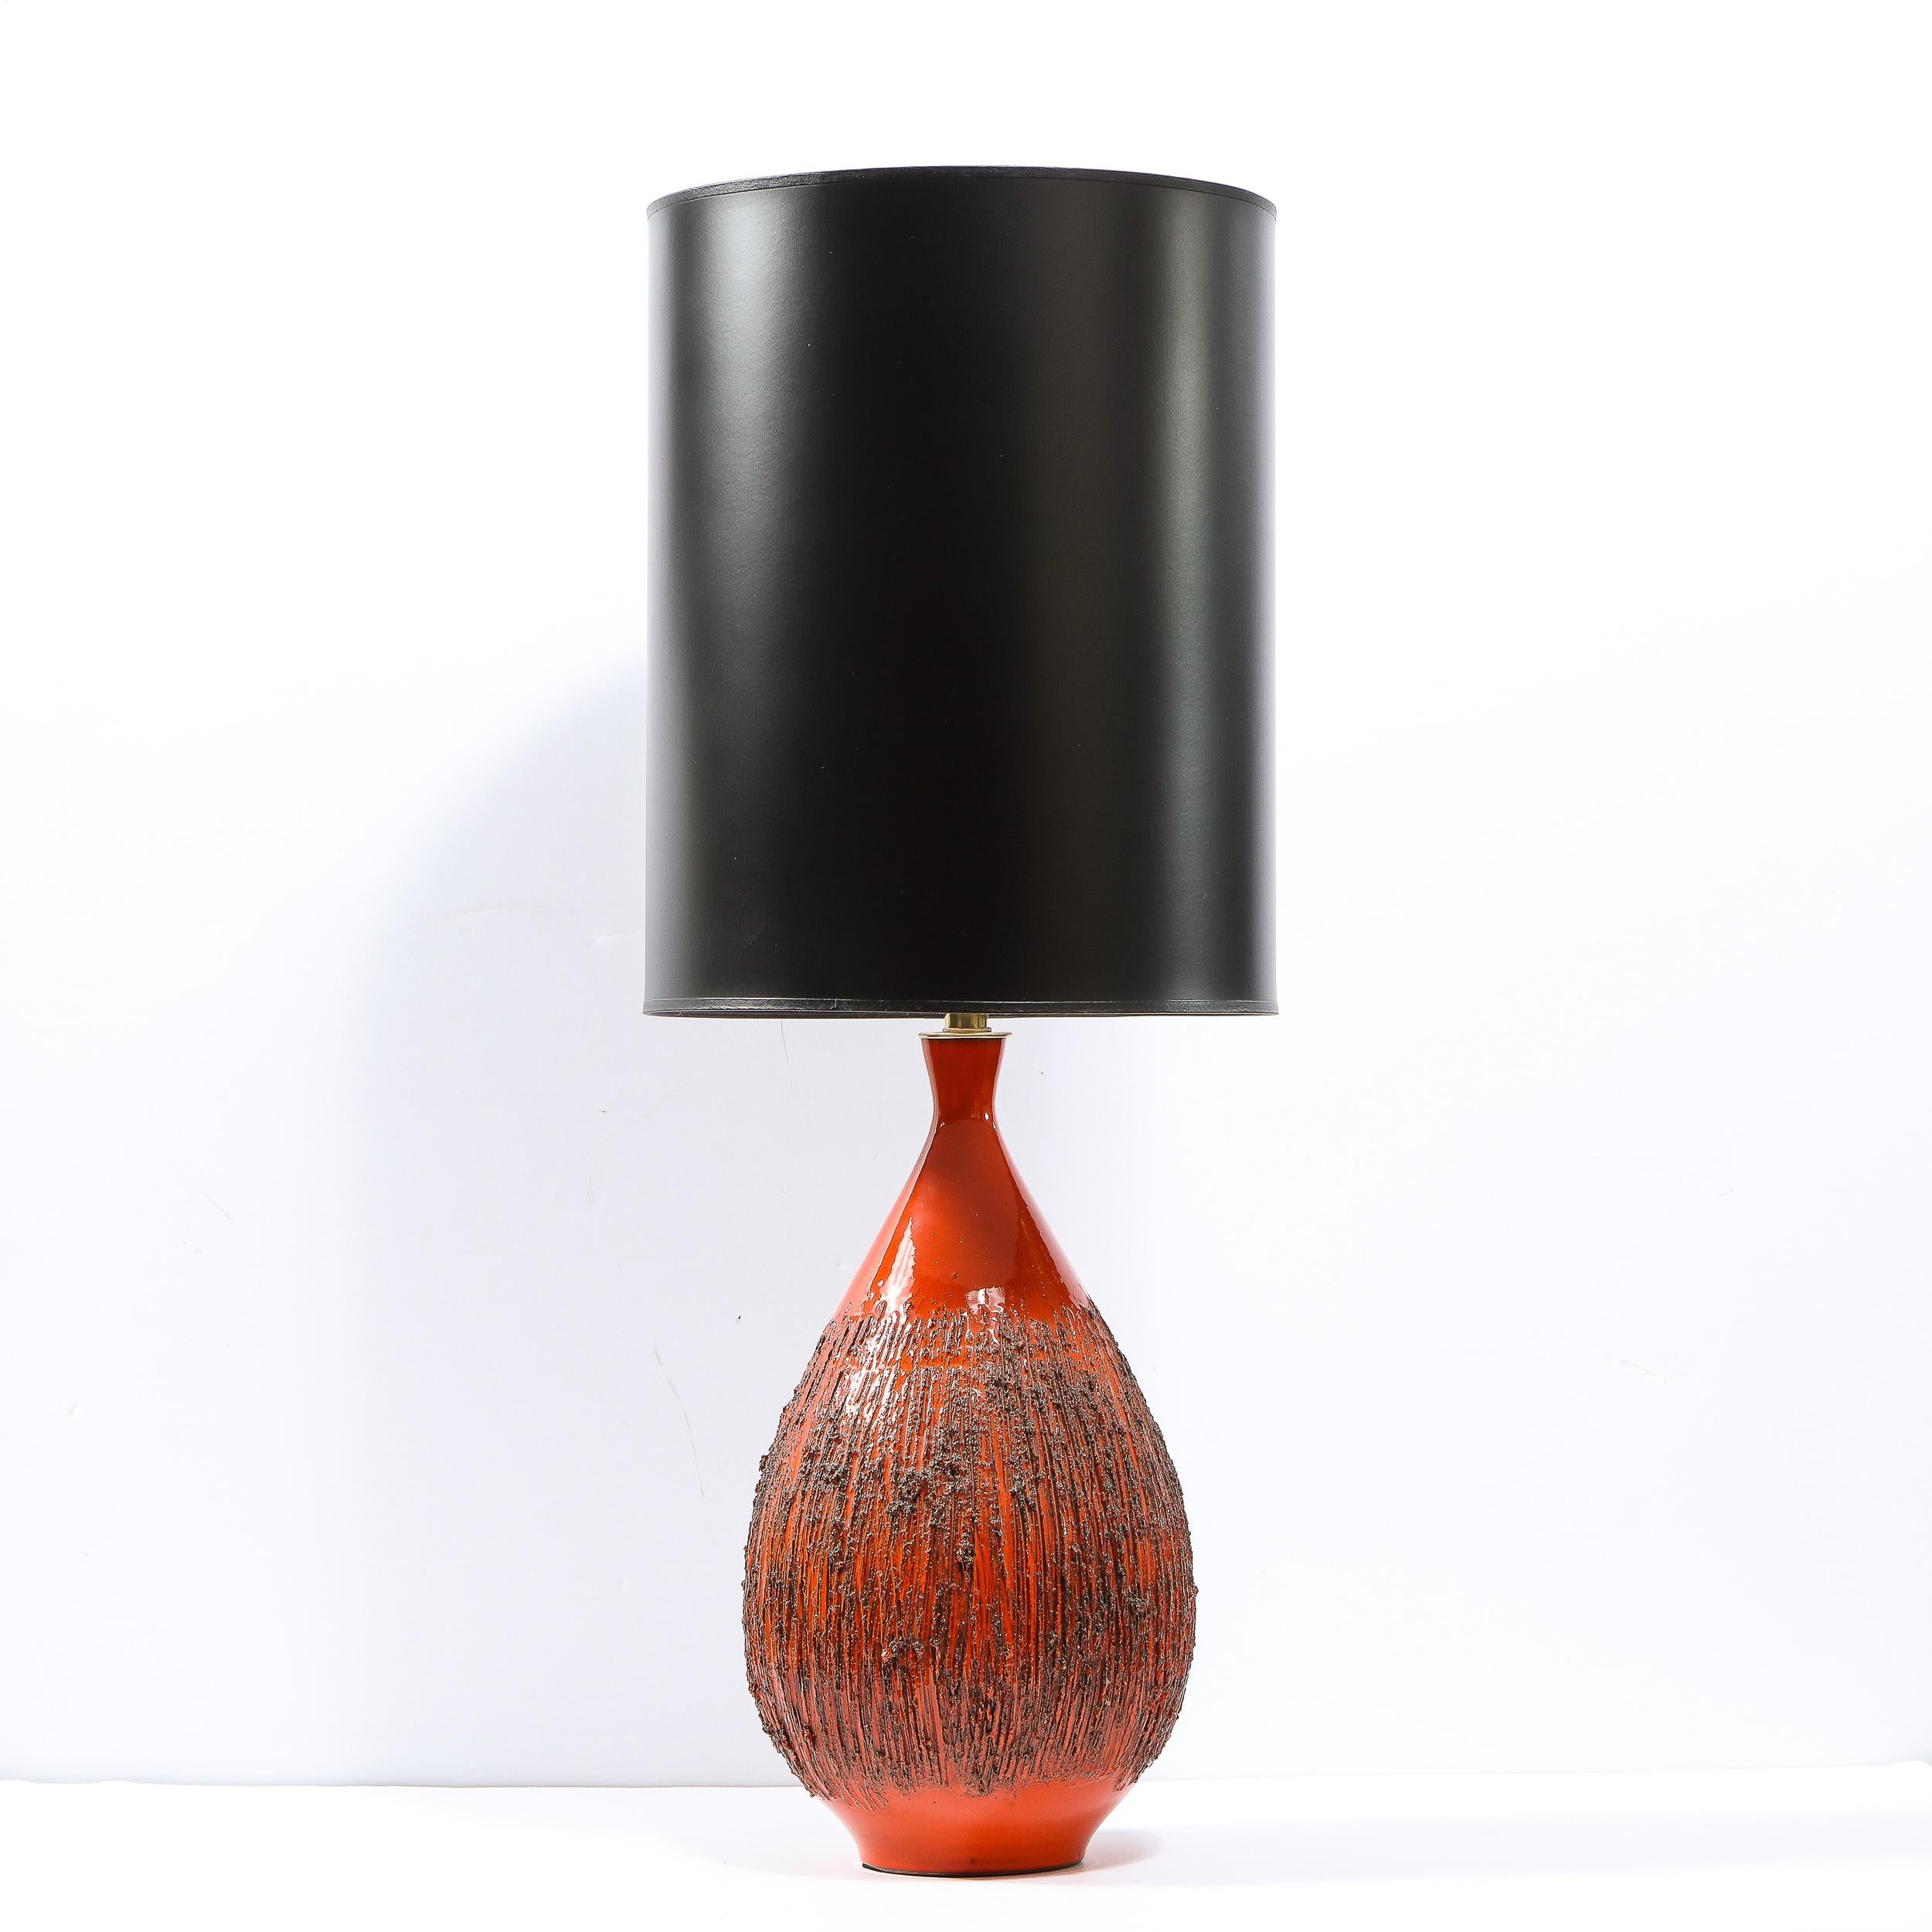 This exquisite Mid-Century Modern table lamp was designed by Lee Rosen for Design Technics in the United States circa 1960. It features a tear drop form in a volcanic molten orange red glaze replete with an organic hand carved vertical striated